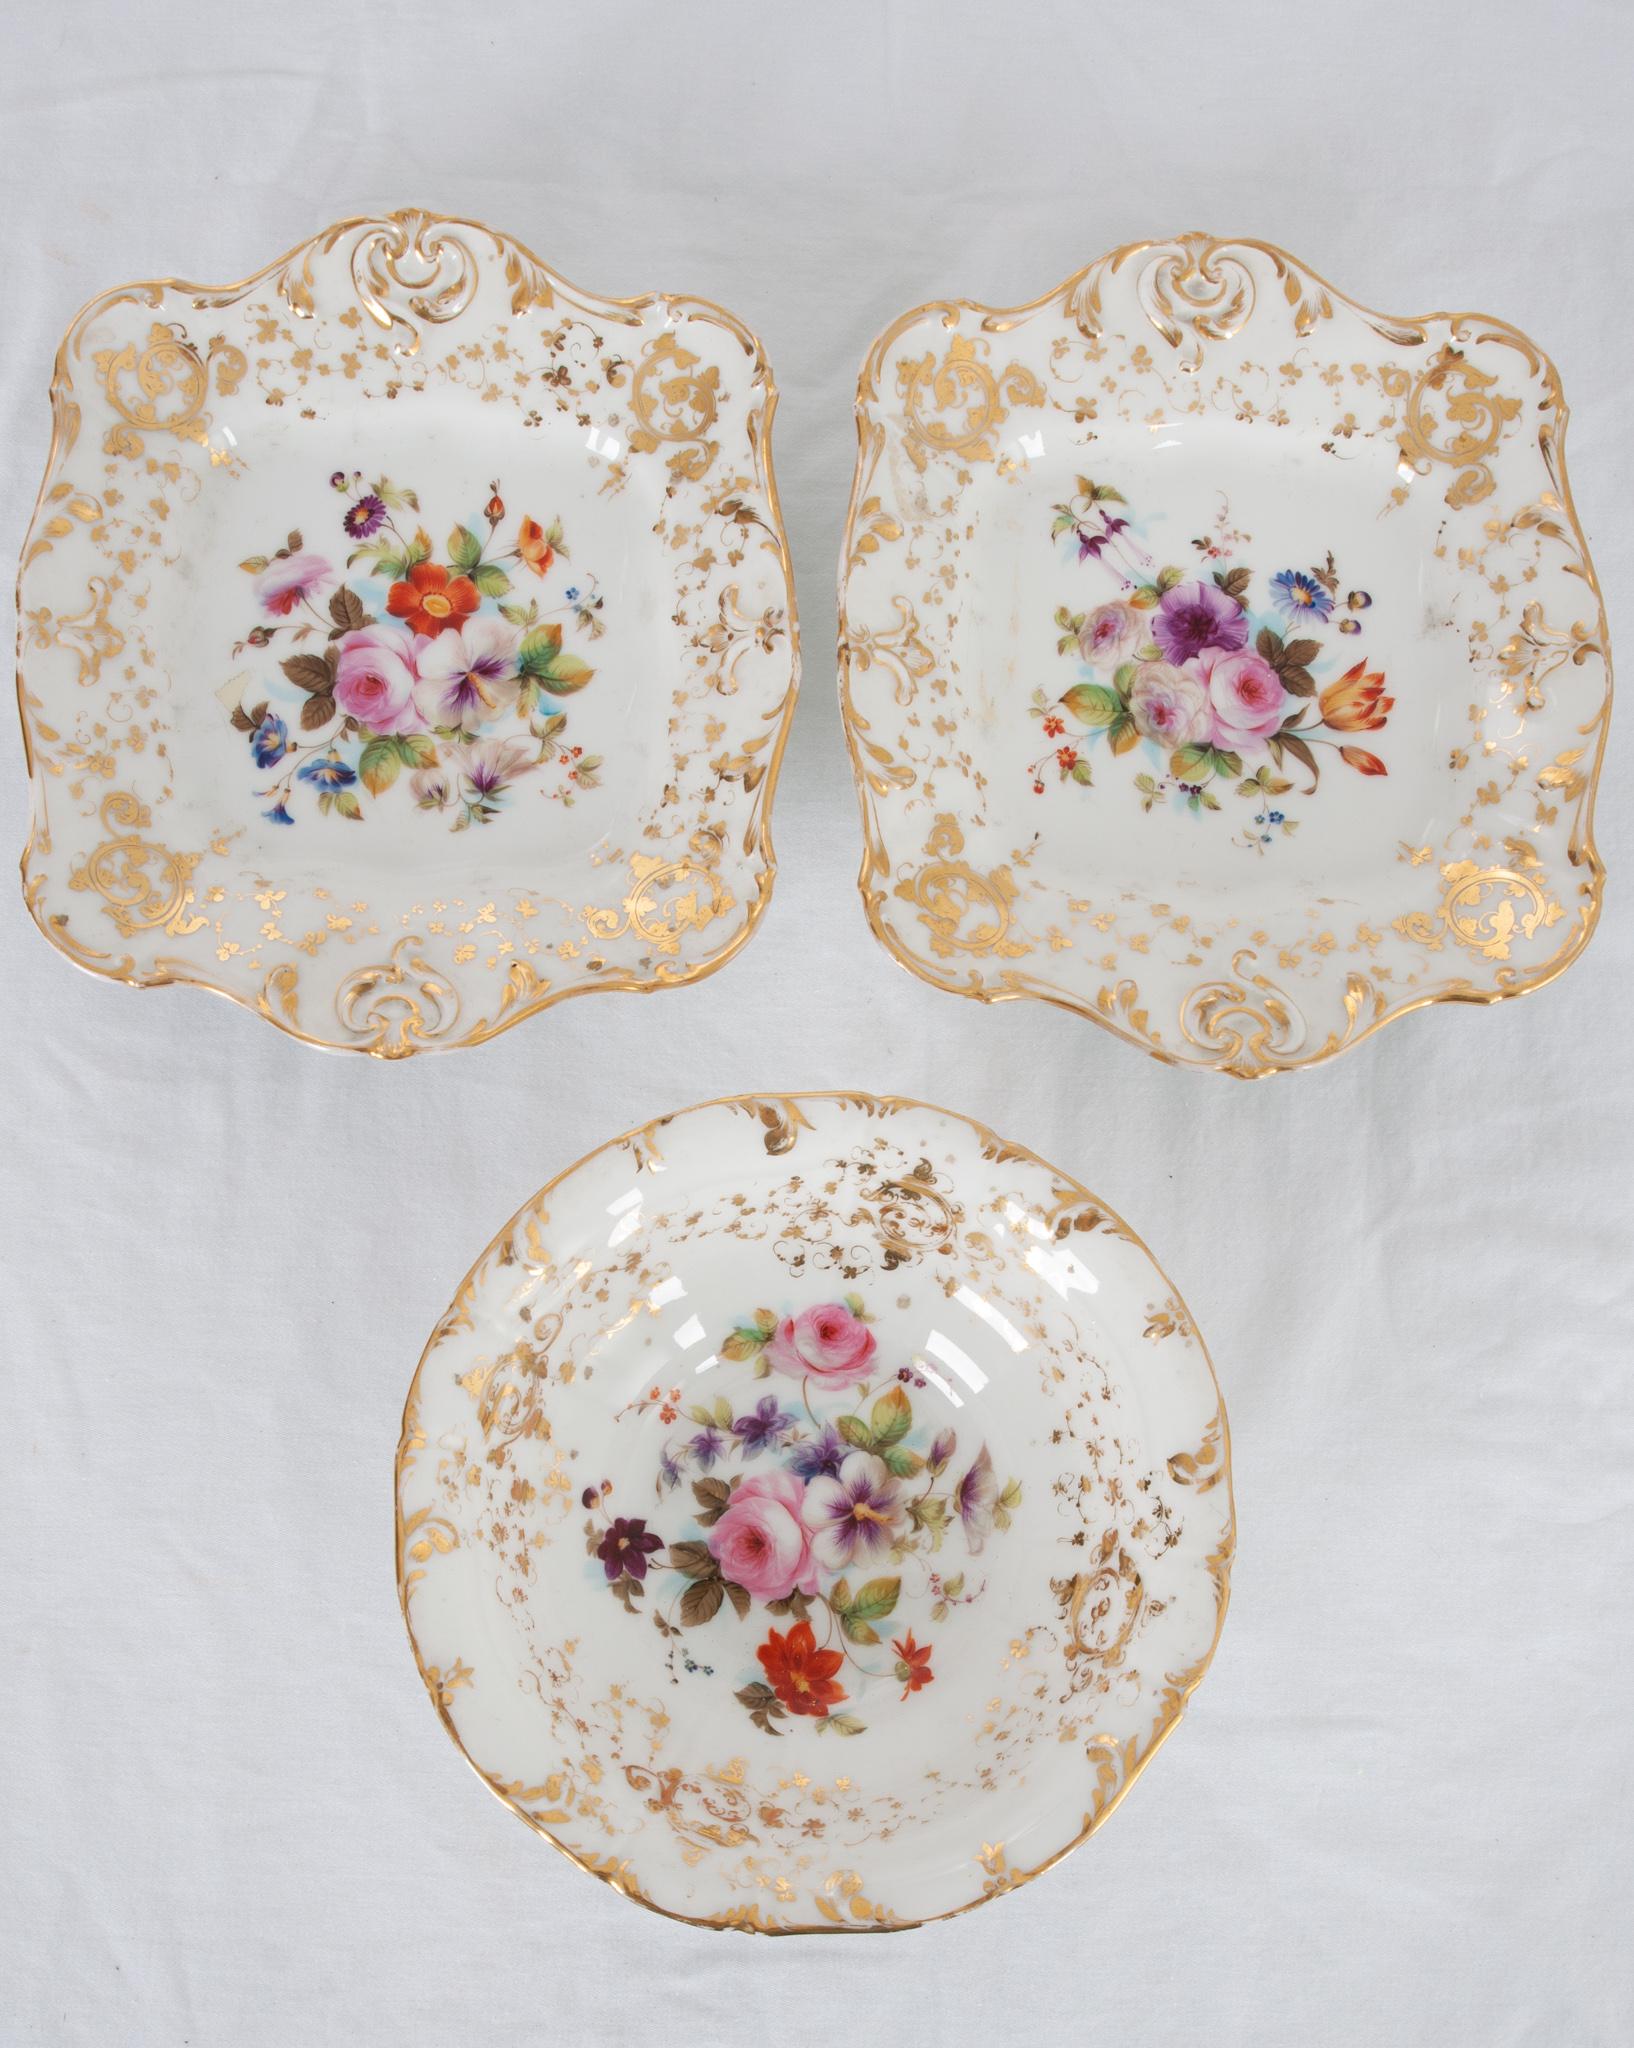 A beautiful set of three hand painted dishes to add a touch of sophistication to tea time! The elevated bowl measures 3-½”height x 8-?” diameter and the matching plates measure 1-?”H x 10-½”W x 9-?”D. A vibrant bouquet of delicately painted flowers